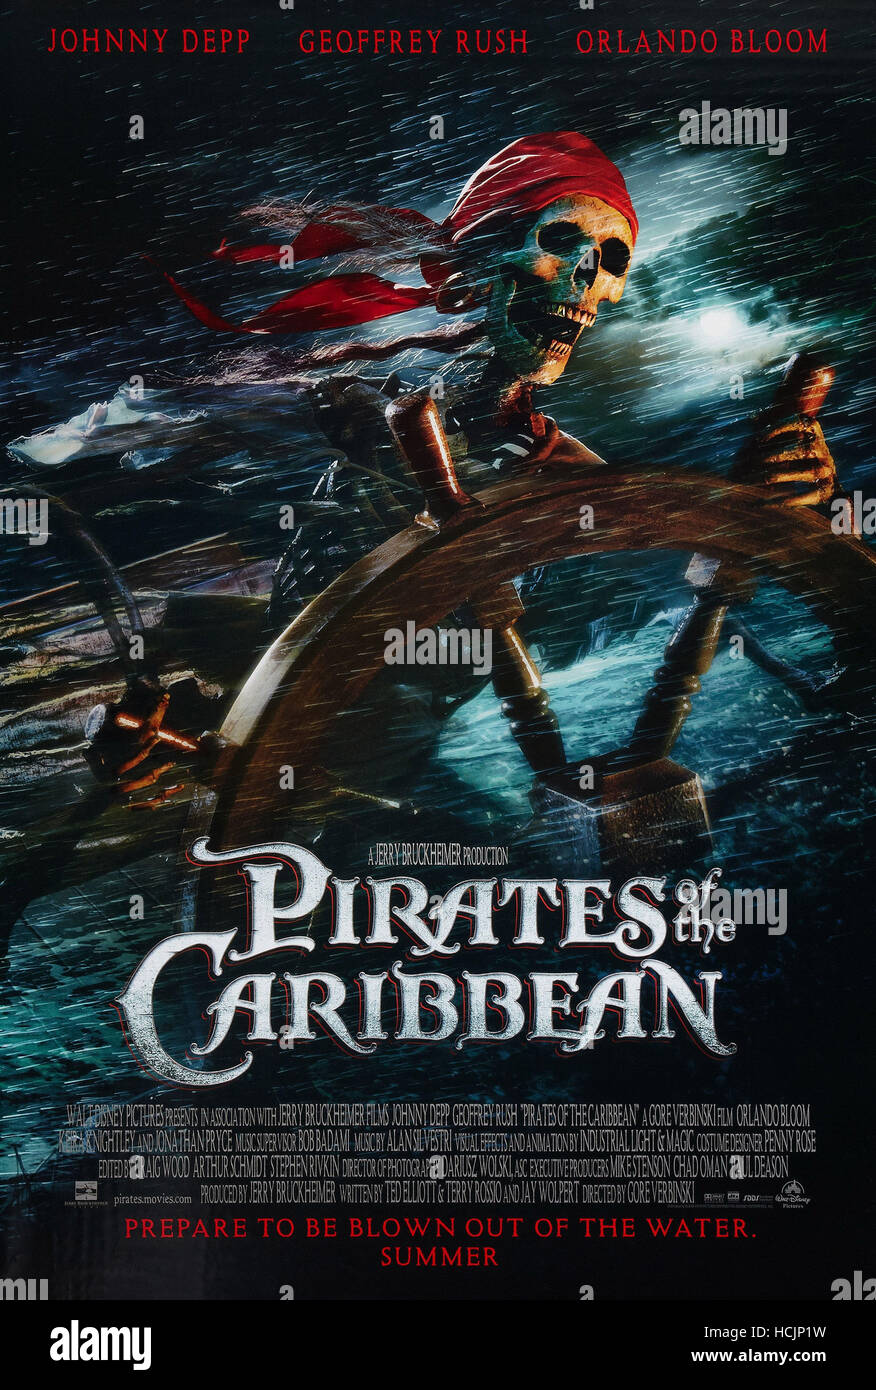 PIRATES OF THE CARIBBEAN: THE CURSE OF THE BLACK PEARL, US advance poster art, 2003. © Walt Disney/courtesy Everett Collection Stock Photo